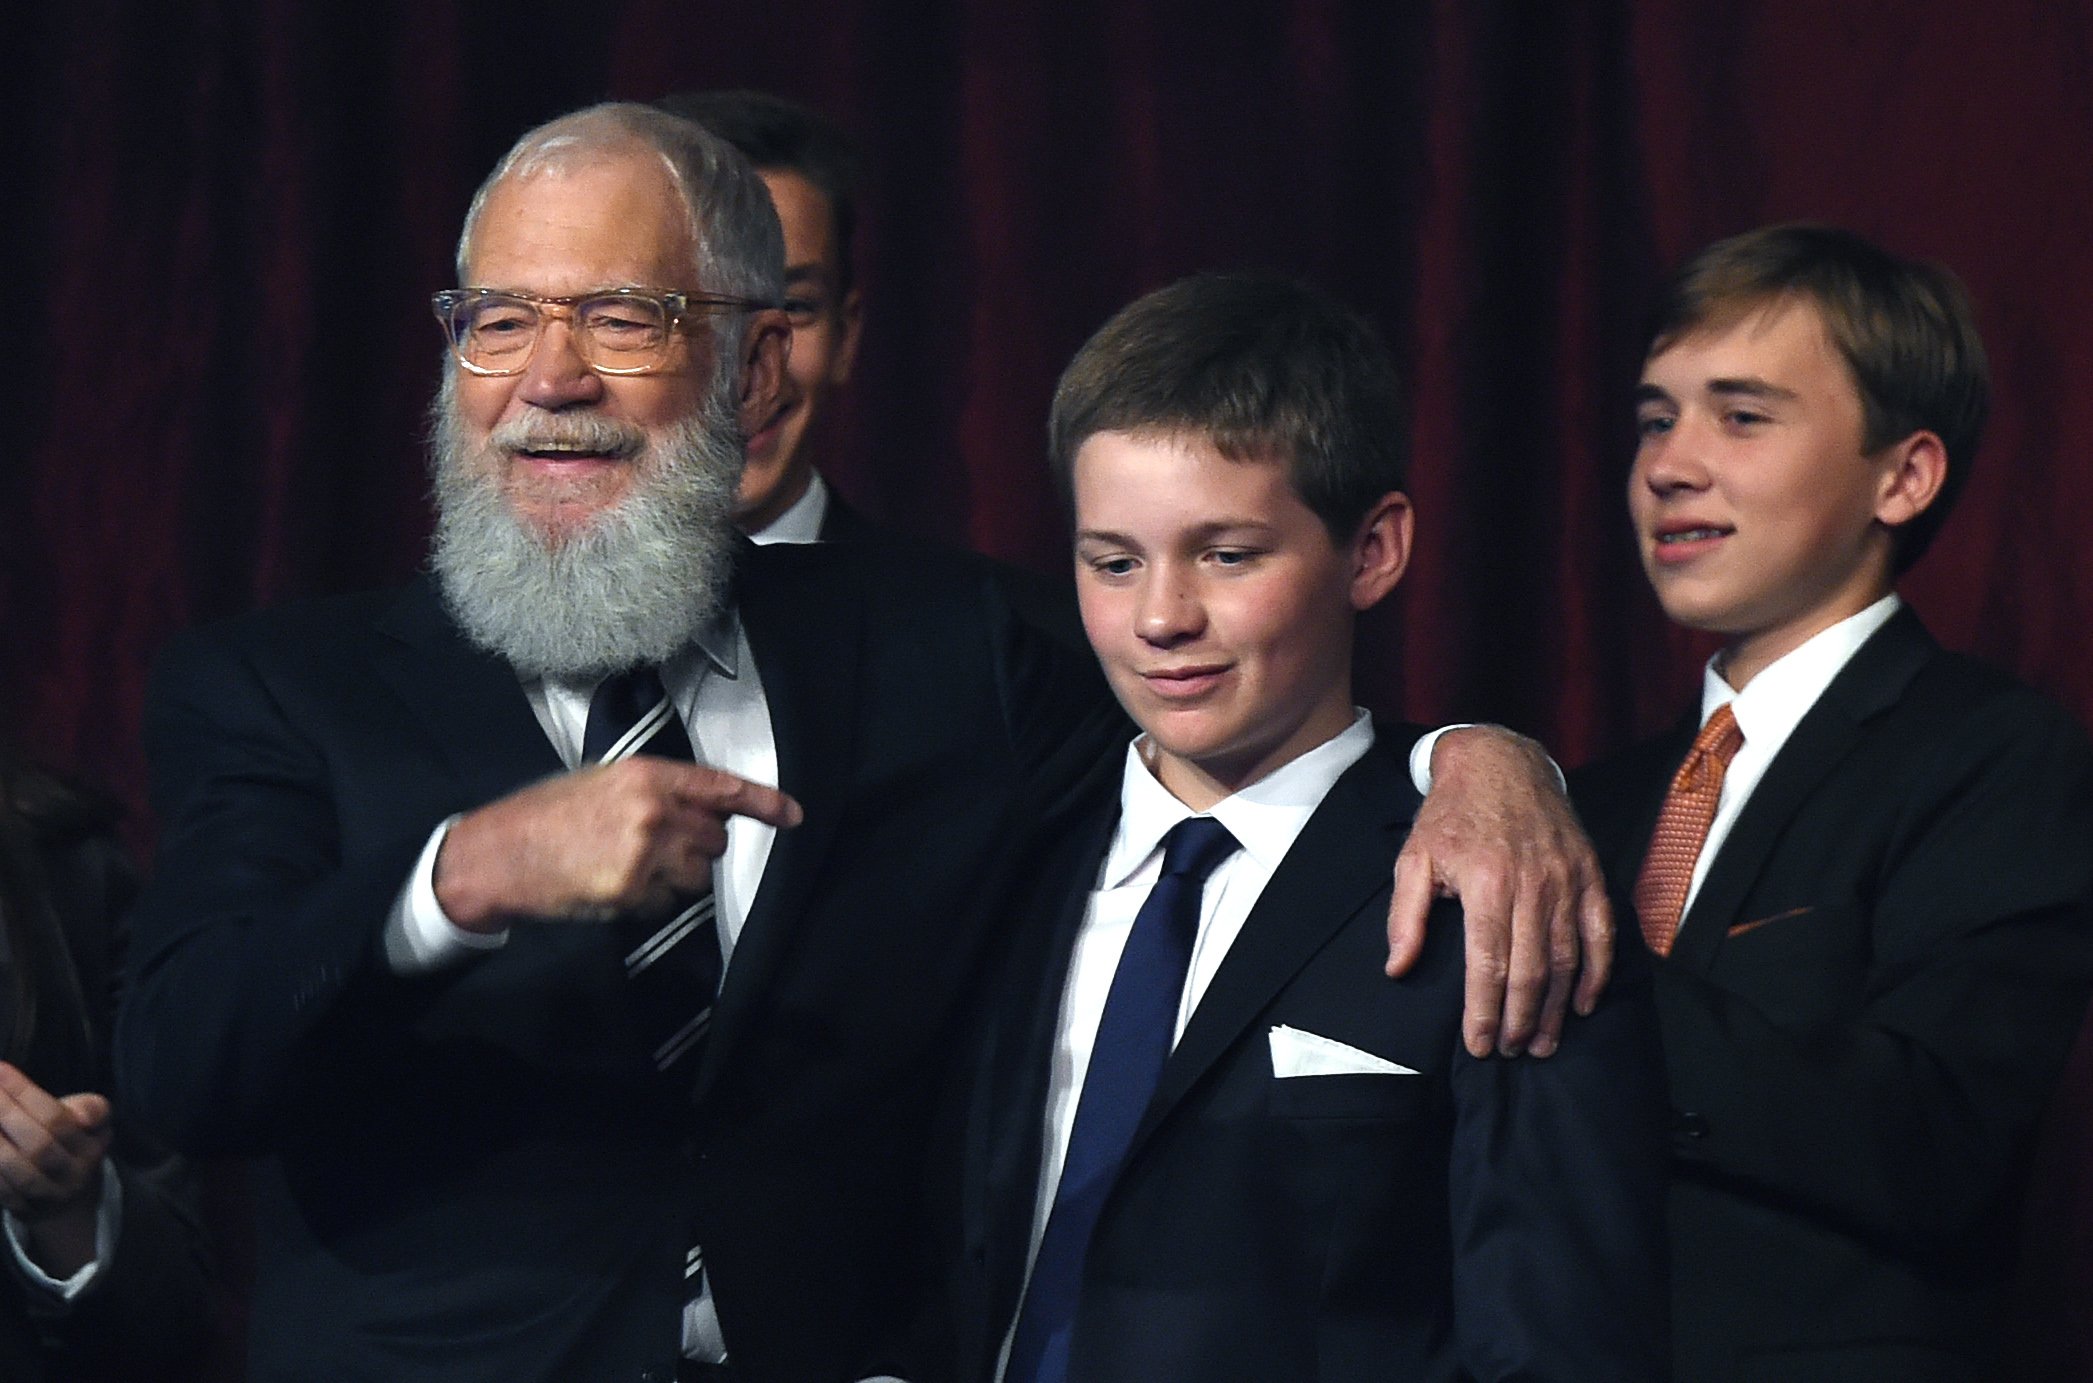 David Letterman with his son Harry Joseph at the 20th Annual Mark Twain Prize for American Humor in Washington, DC, on October 22, 2017 I Source: Getty Images